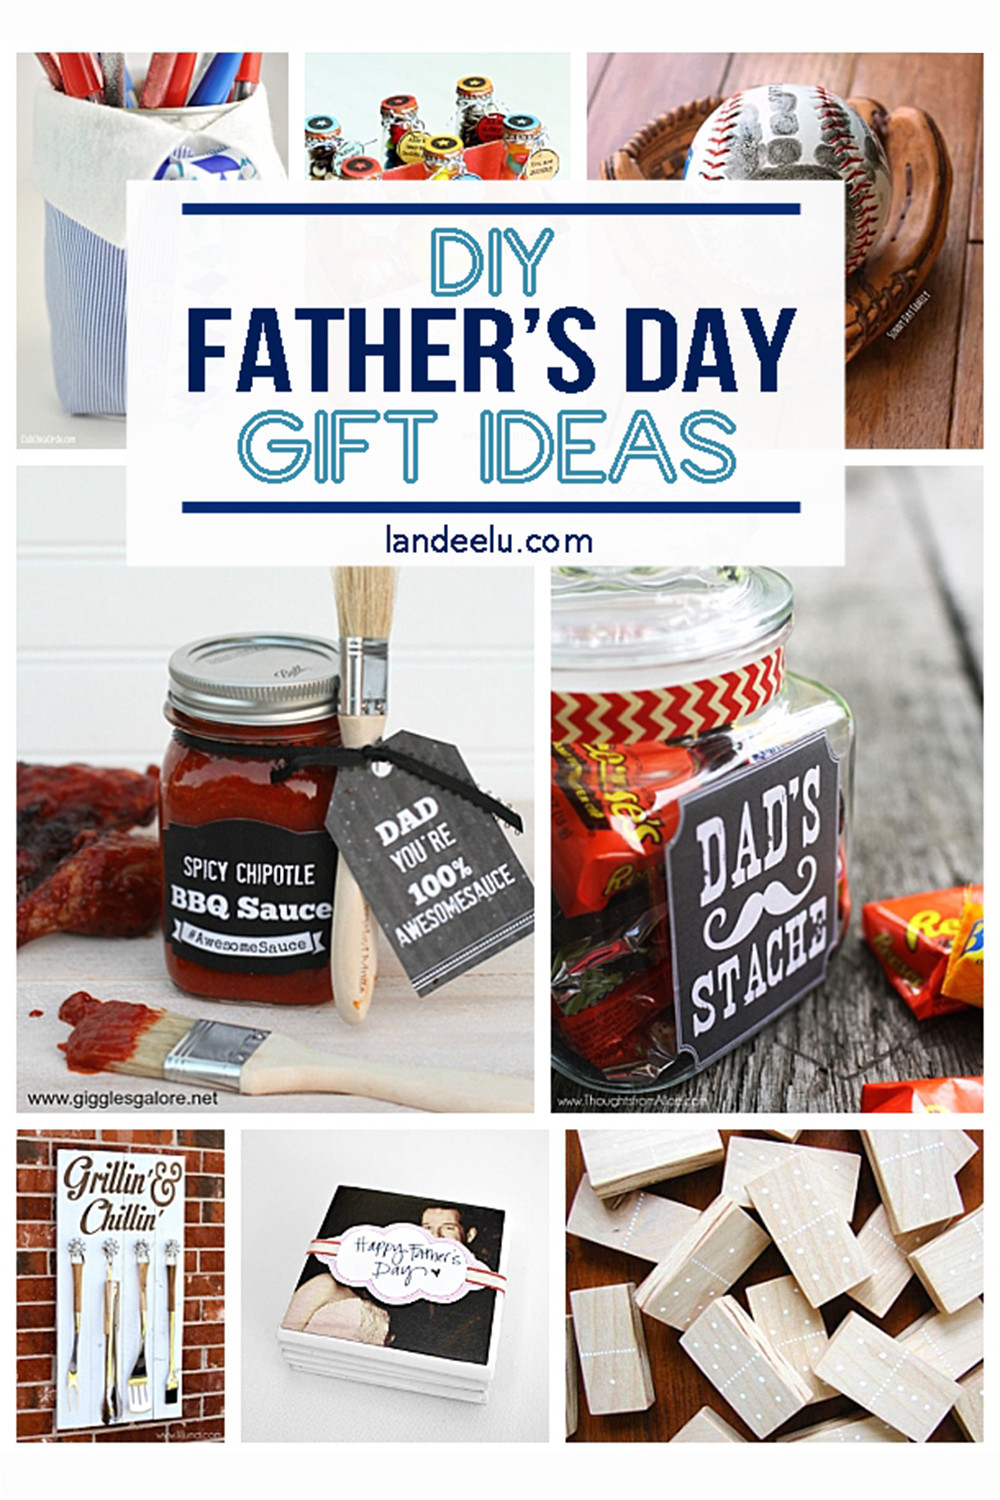 Diy Gift Ideas For Father'S Day
 21 DIY Father s Day Gifts to Celebrate Dad landeelu